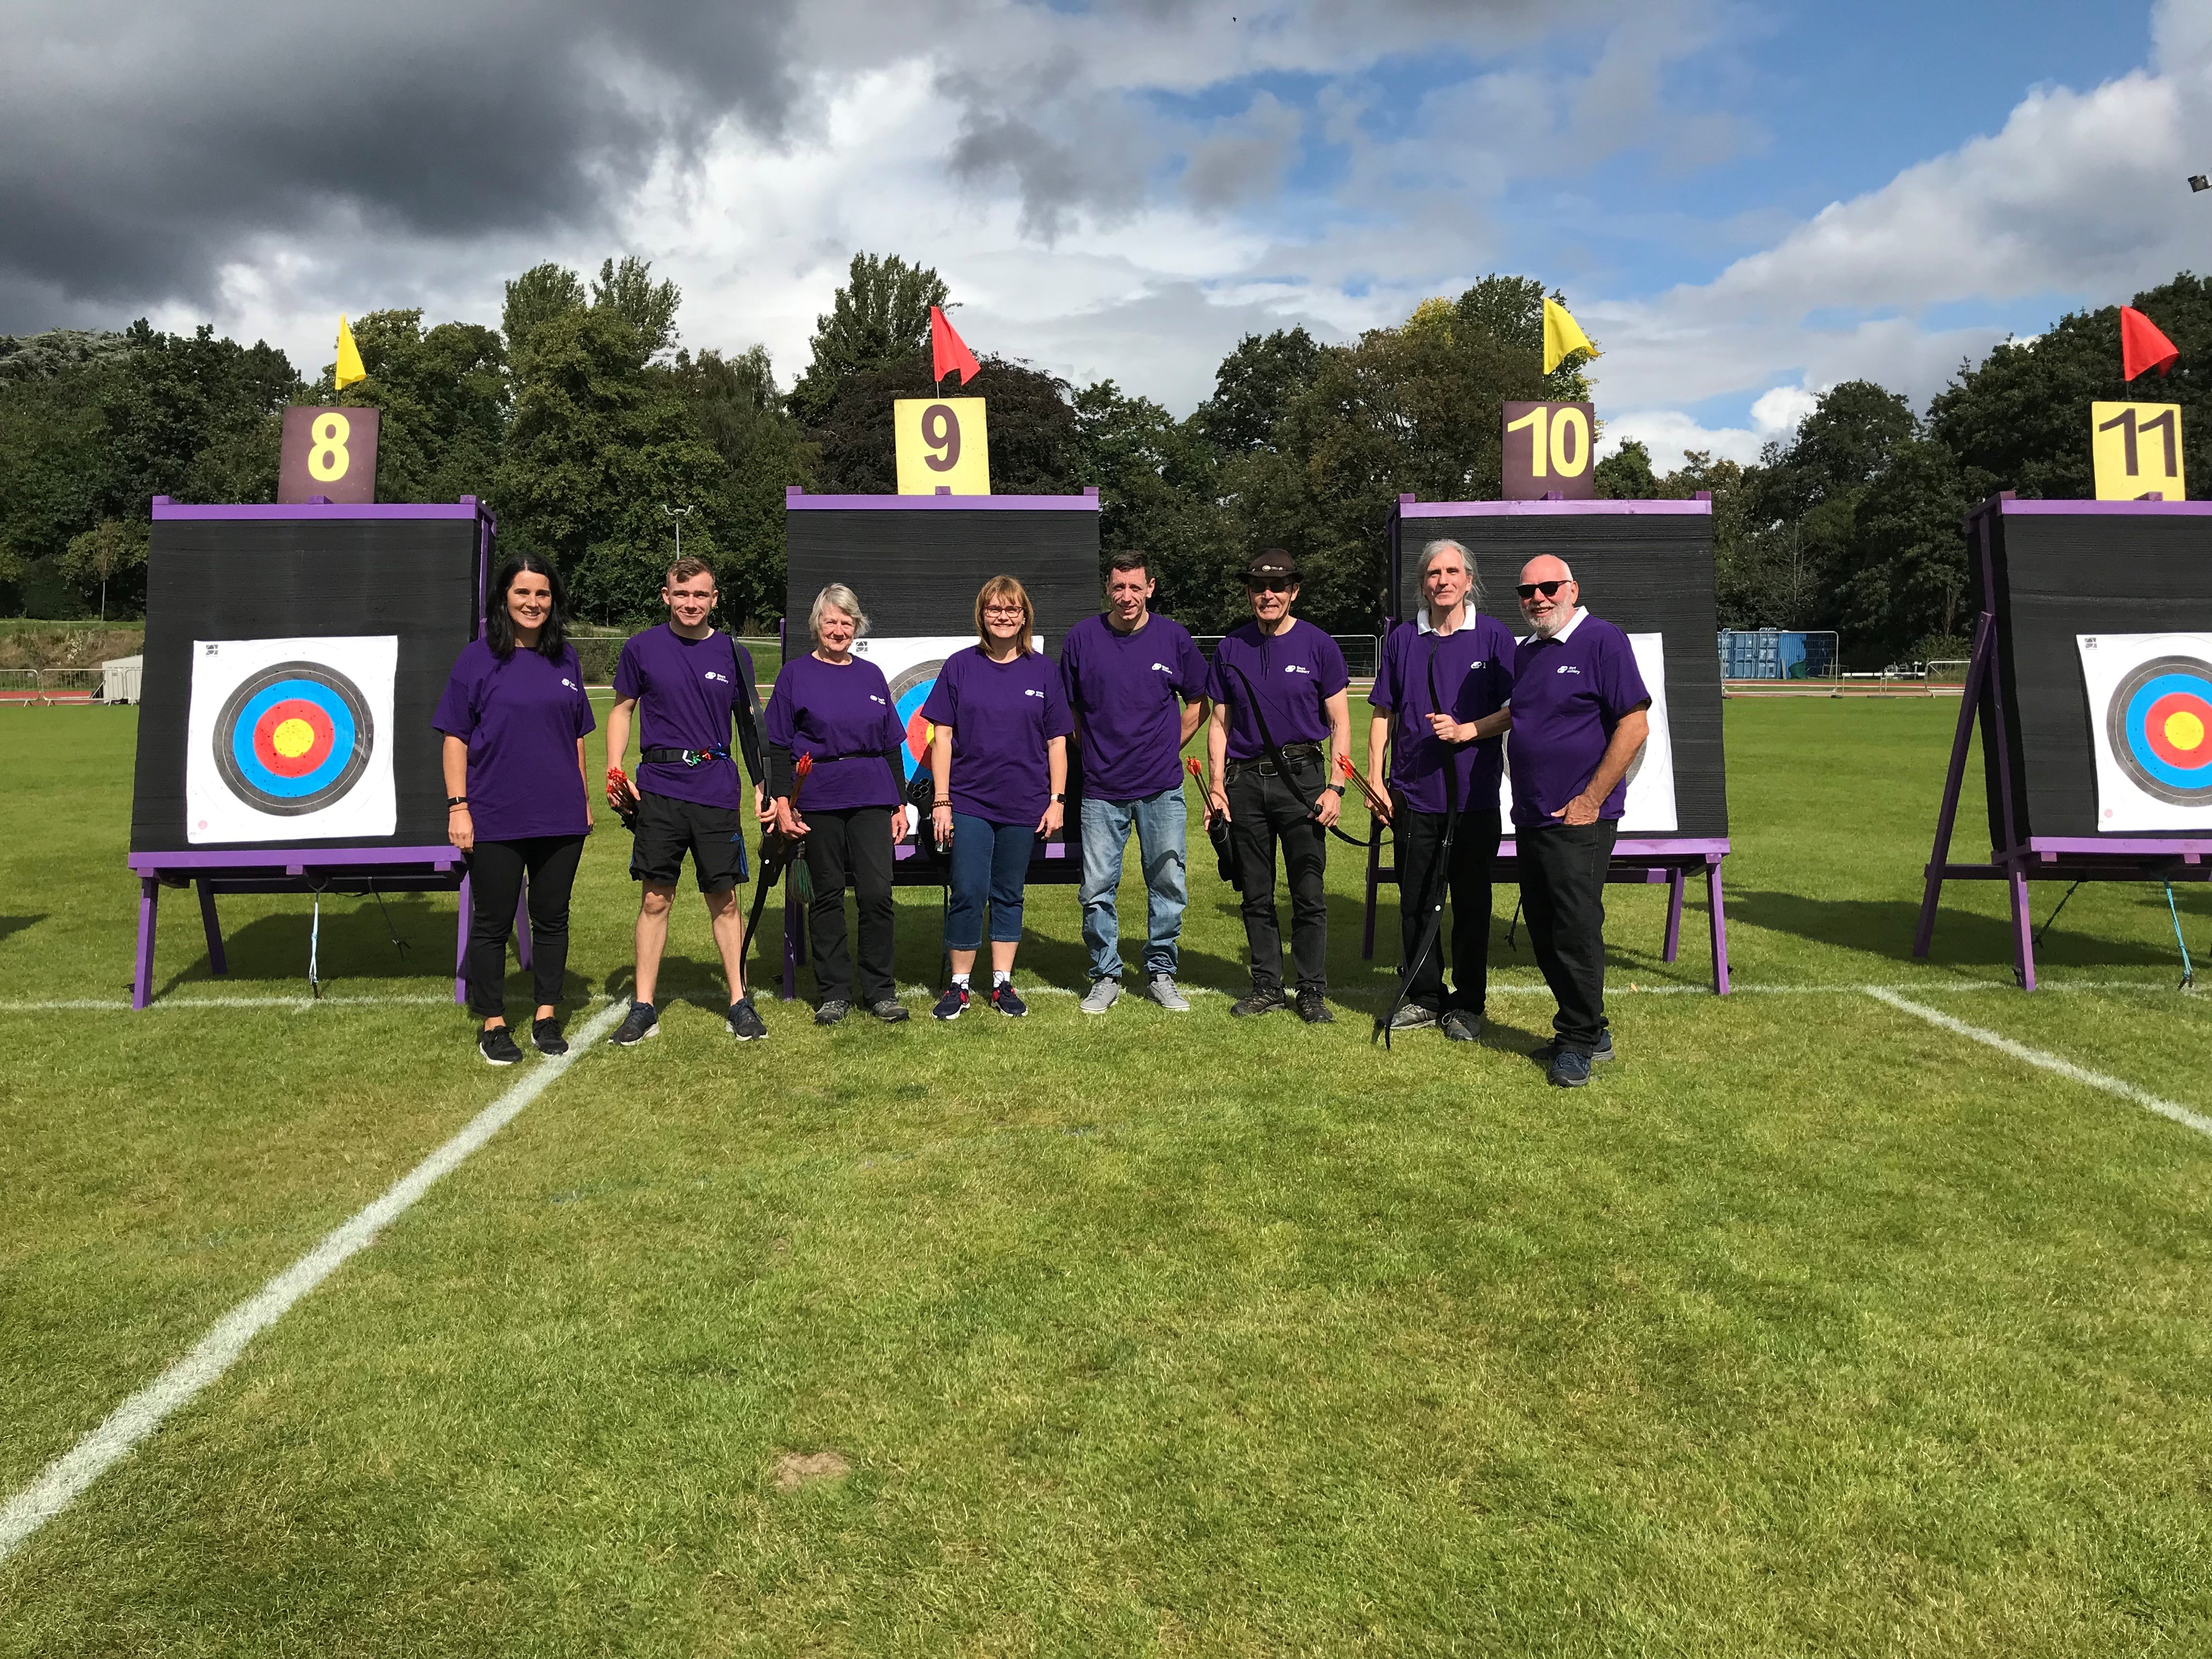 Having a go at archery at the World Blind Games